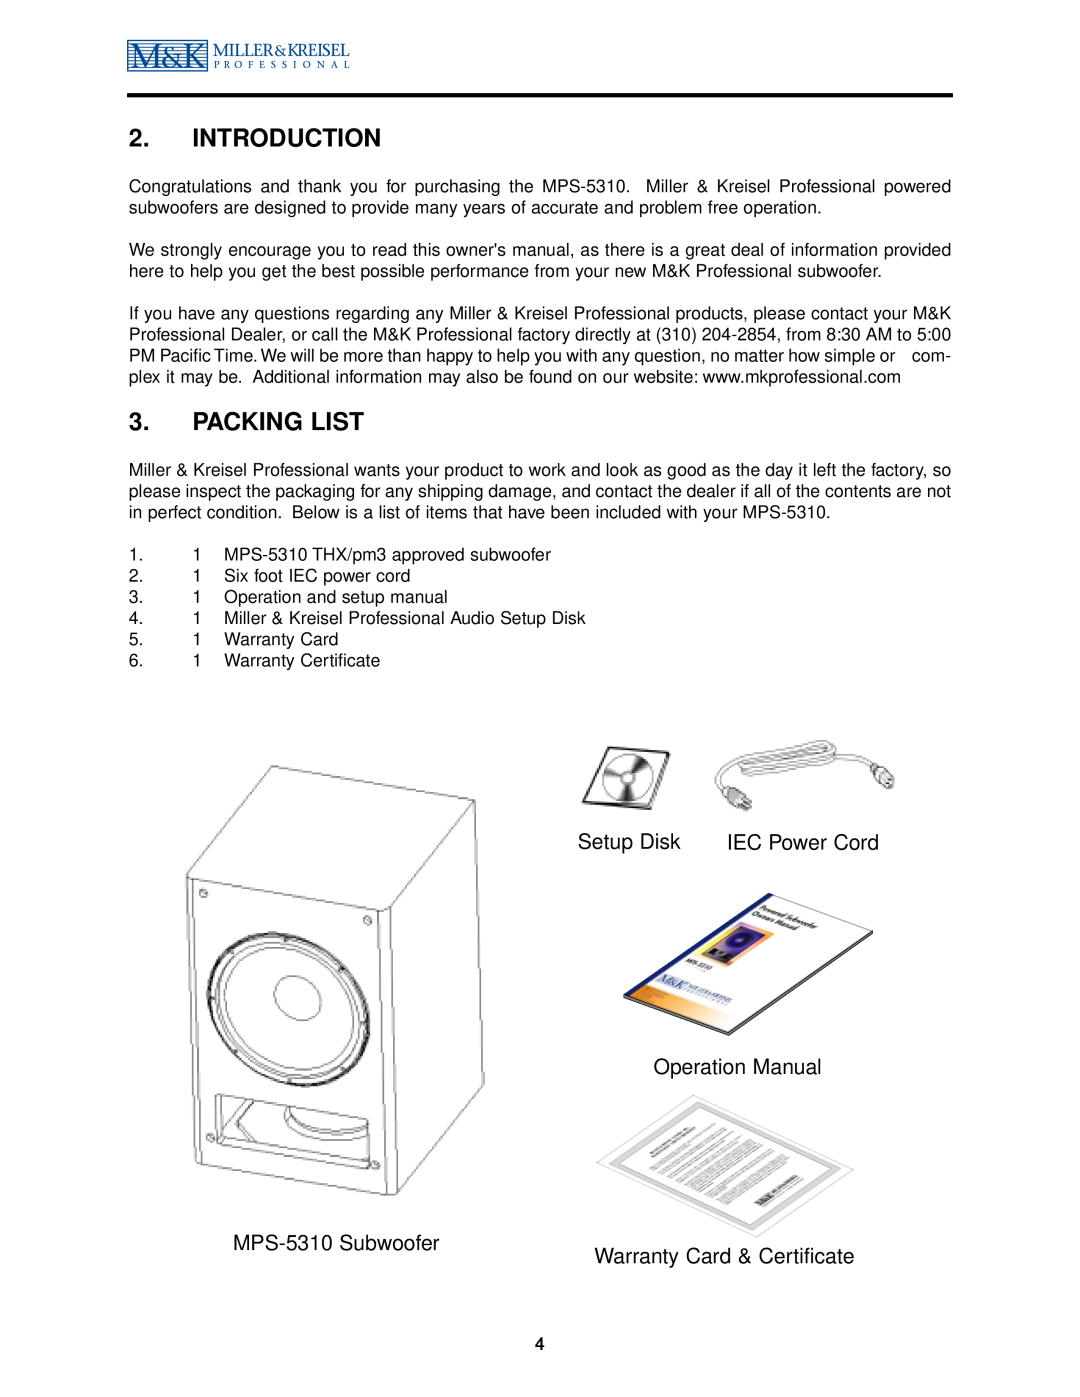 MK Sound MPS-5410 operation manual Introduction, Packing List, Setup Disk, IEC Power Cord, MPS-5310Subwoofer 